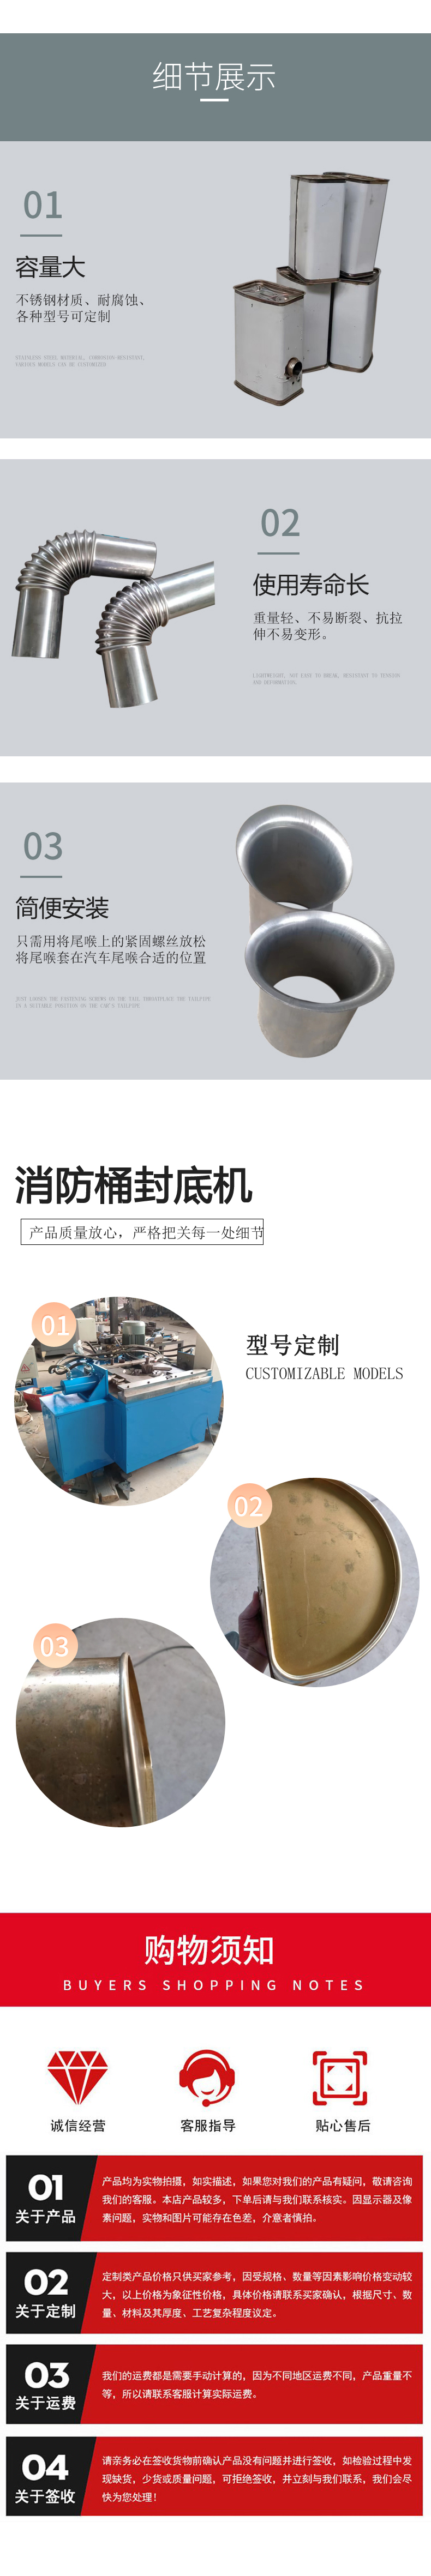 Mold manufacturing, Debo mechanical air duct curling machine, steel barrel production equipment, 50-100 liter straight seam welding machine